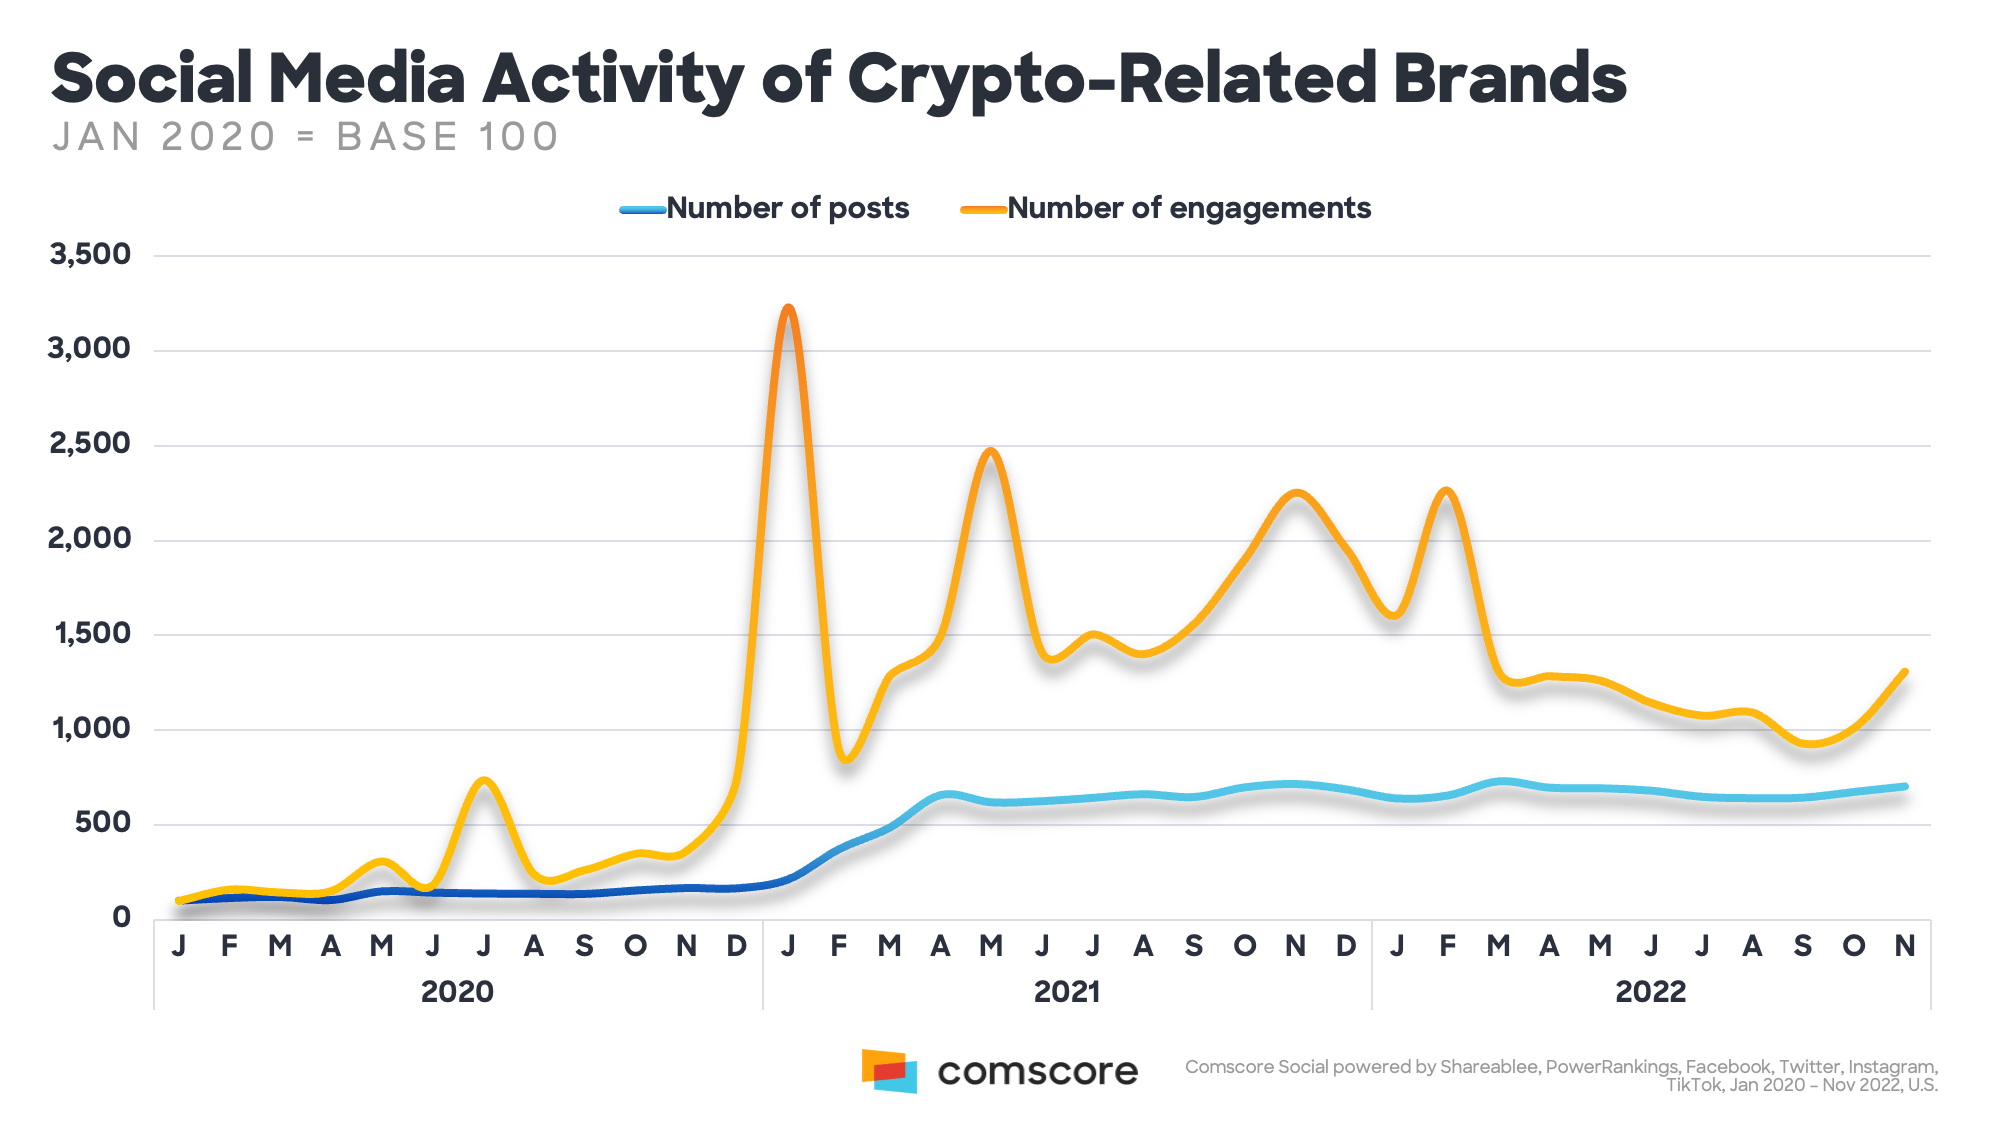 Social Media Activity of Crypto-Related Brands